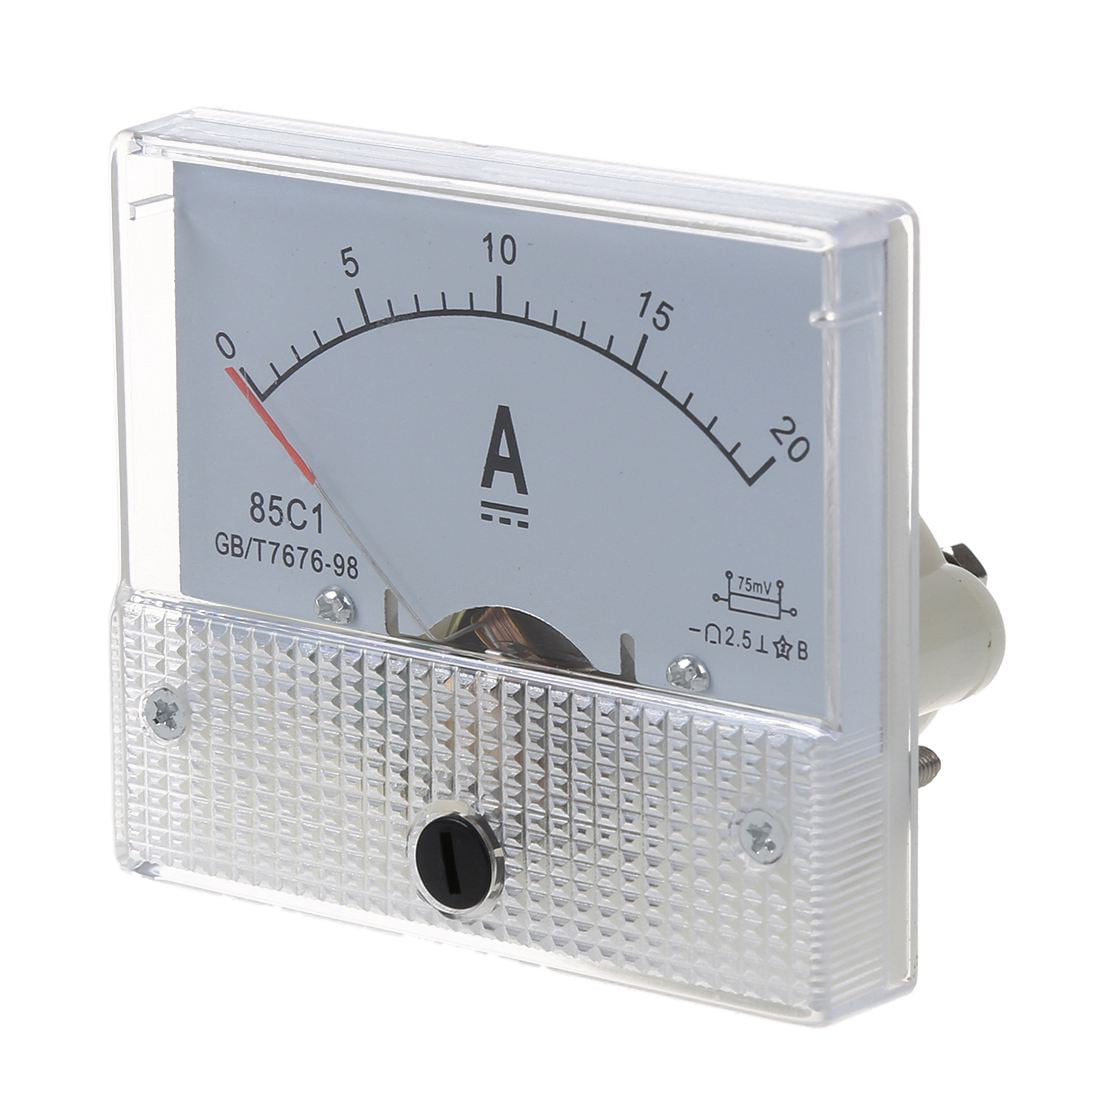 New 20A Analog Ampere Panel Meter Current Amp FP 